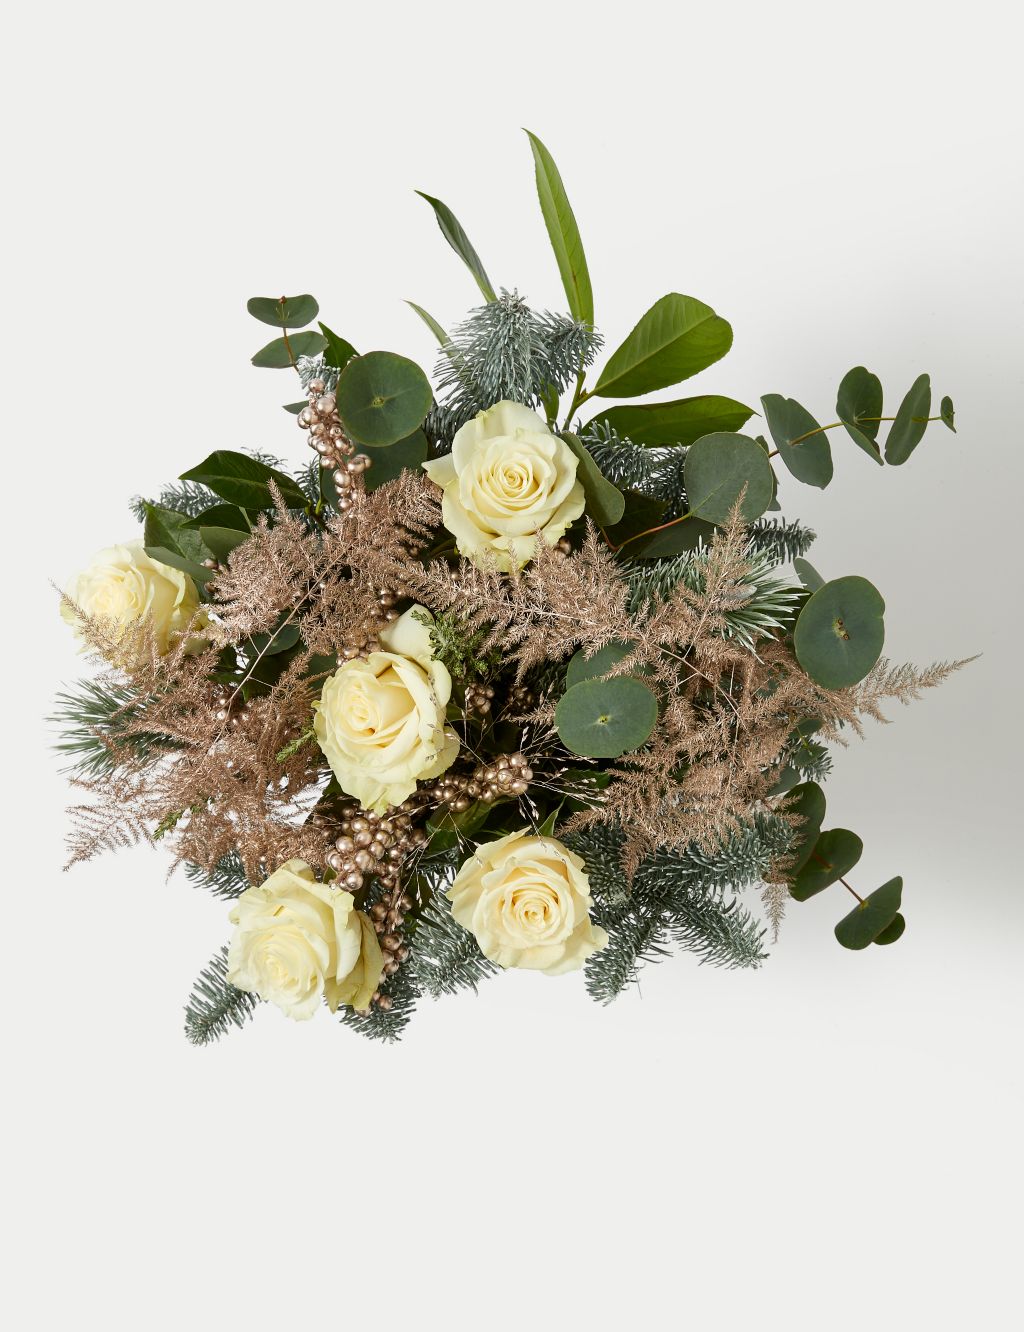 Luxury White Rose Christmas Bouquet in Basket